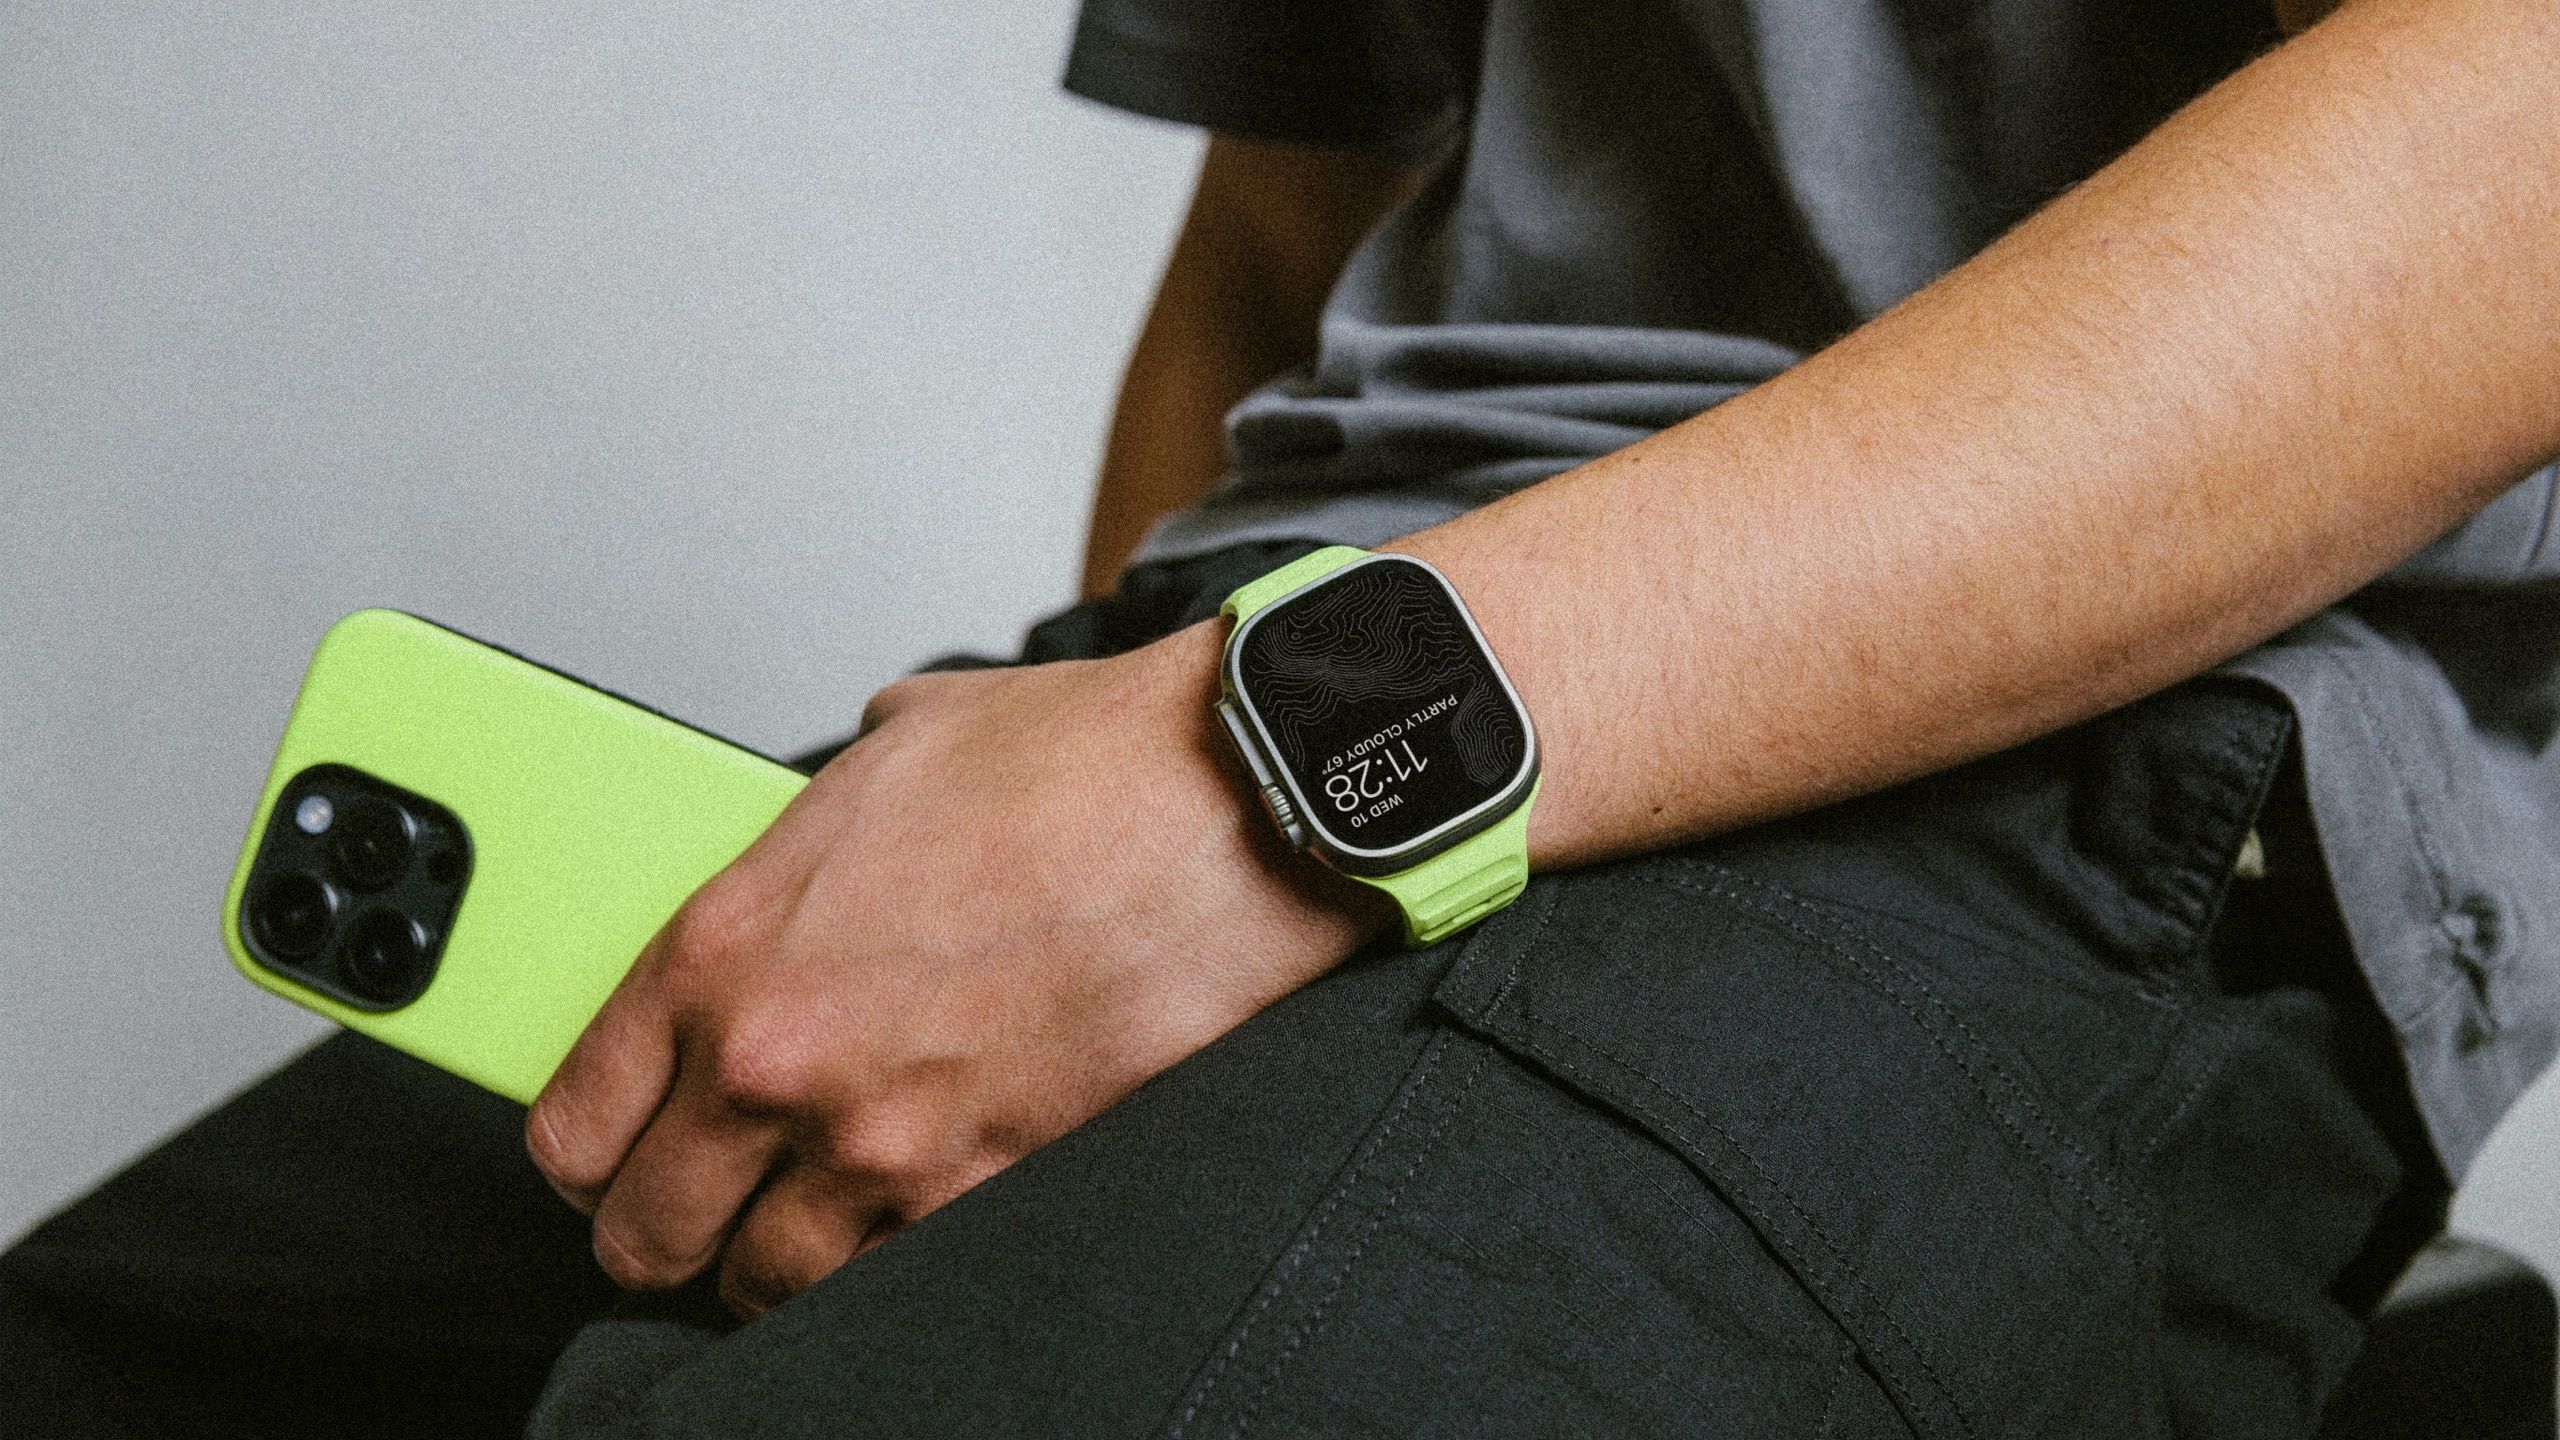 Nomad releases limited edition Glow 2.0 Sport Band and Case